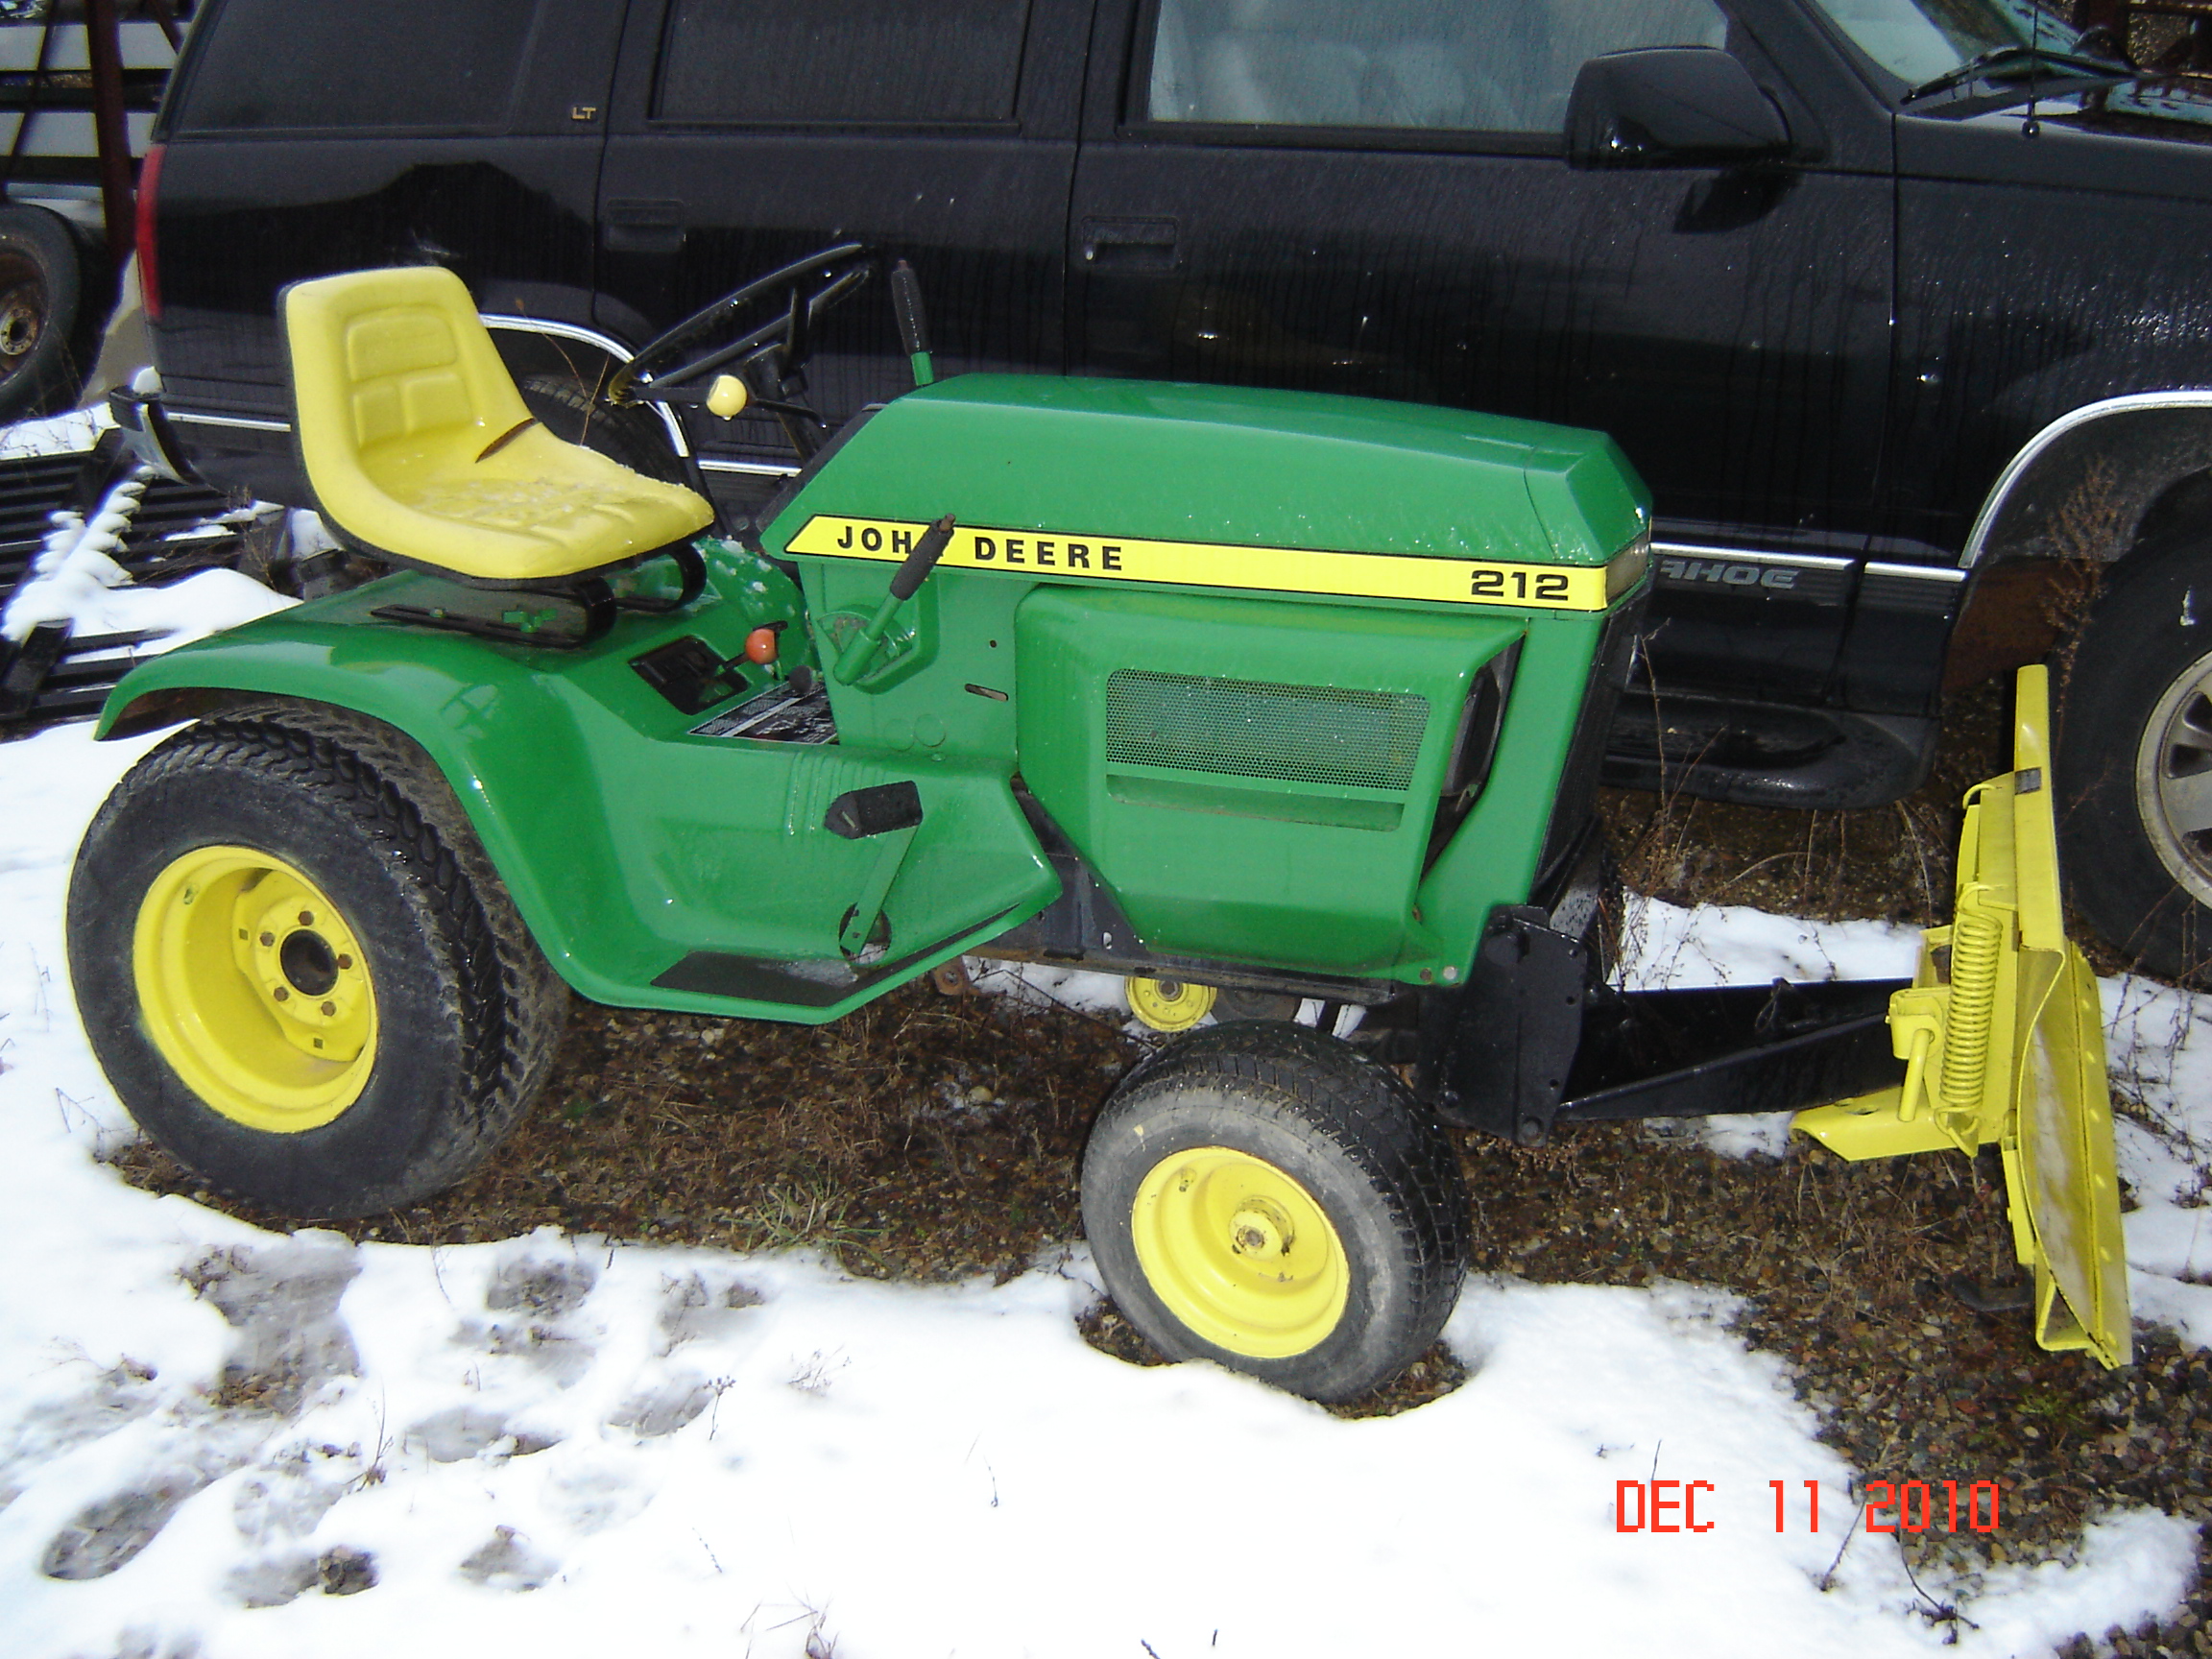 John Deere Lawn Tractor 212 submited images.